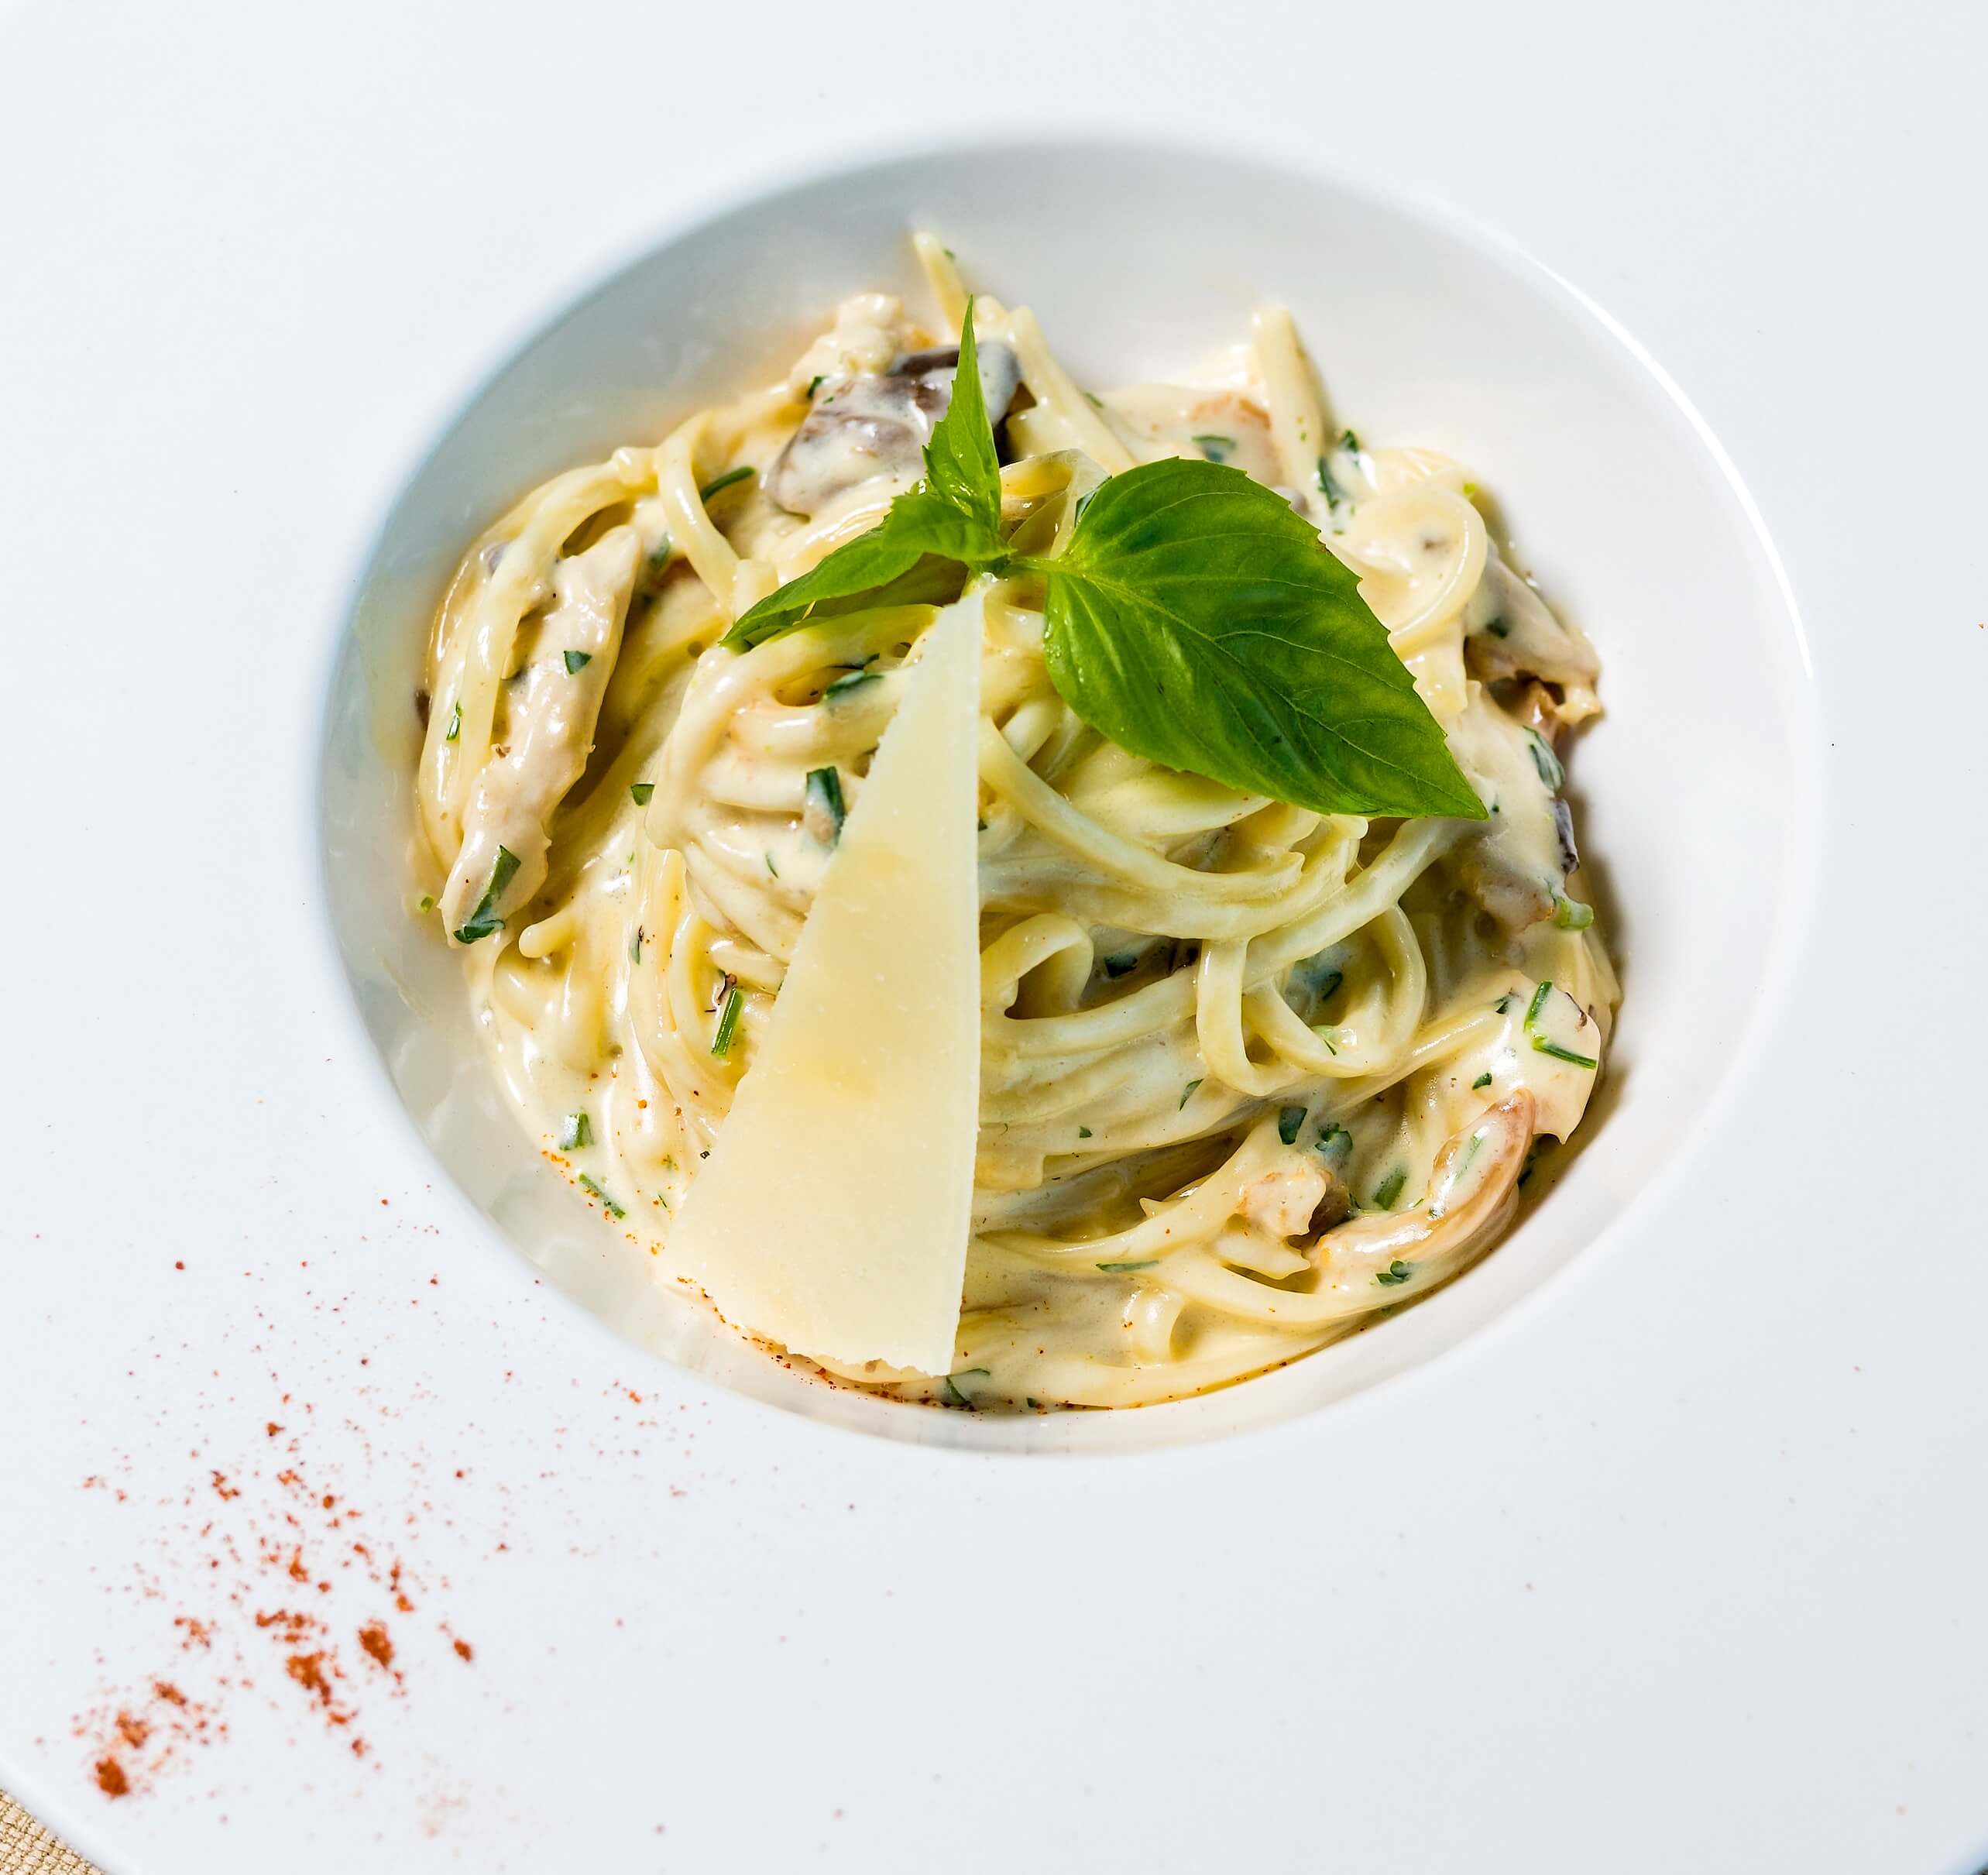 An image of cheese and herb pasta to represent herbs for cheese.